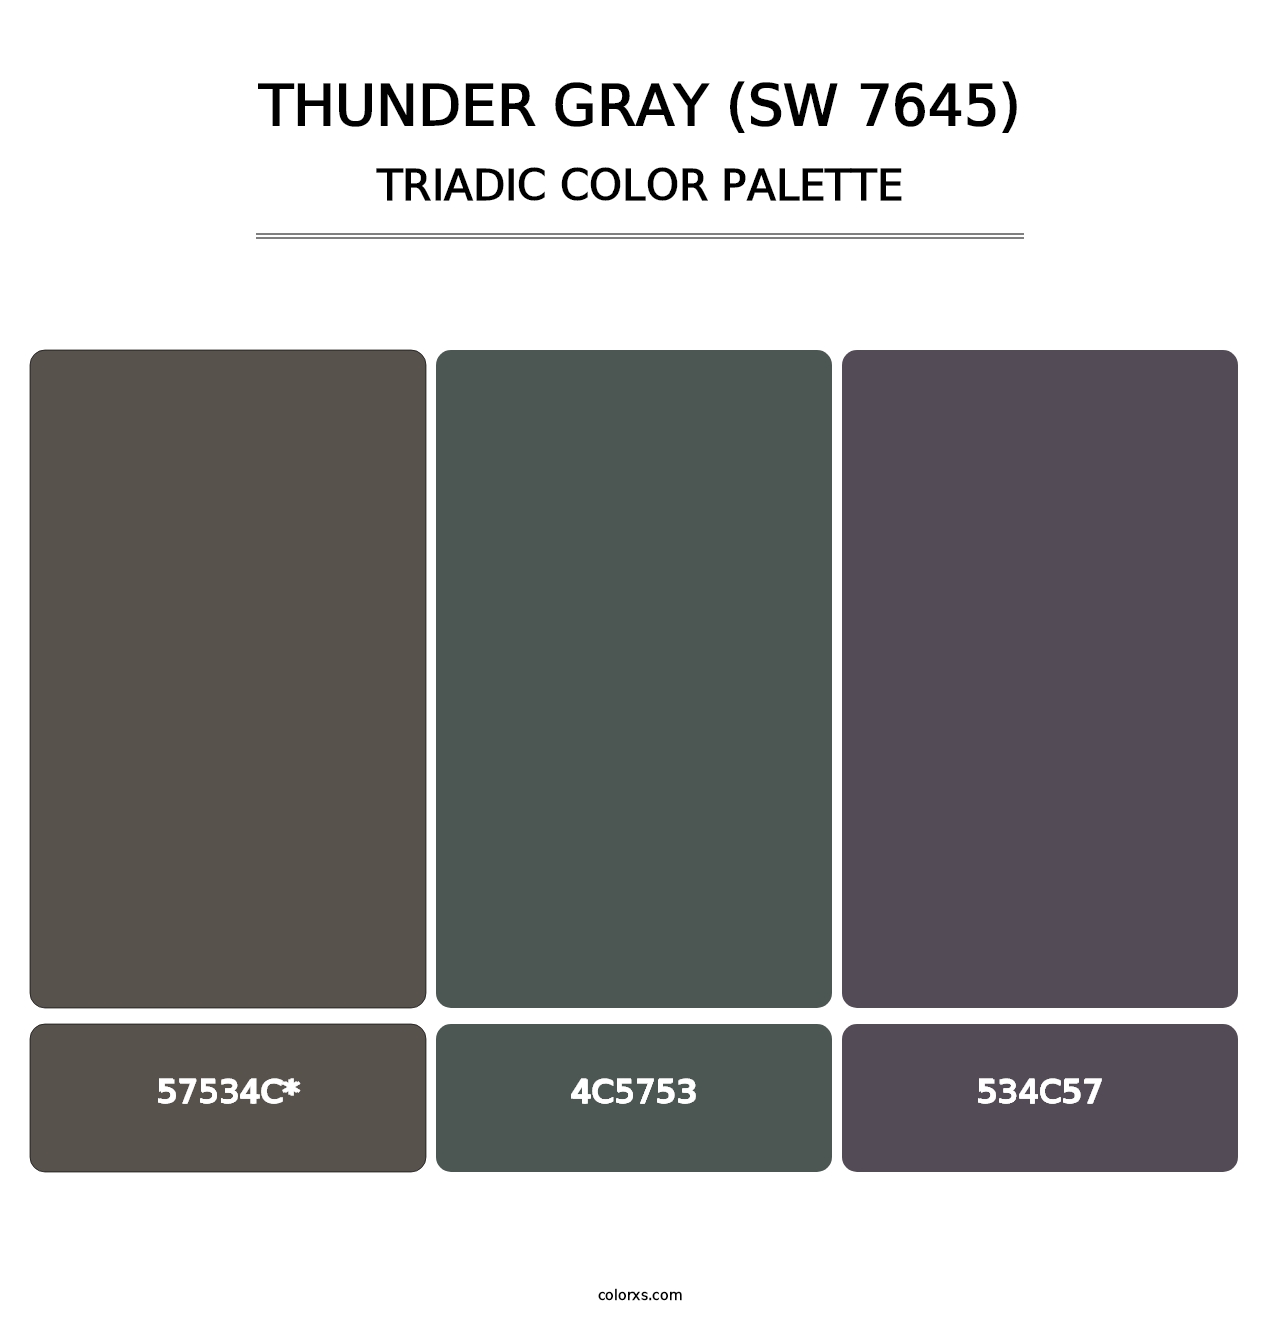 Thunder Gray (SW 7645) - Triadic Color Palette